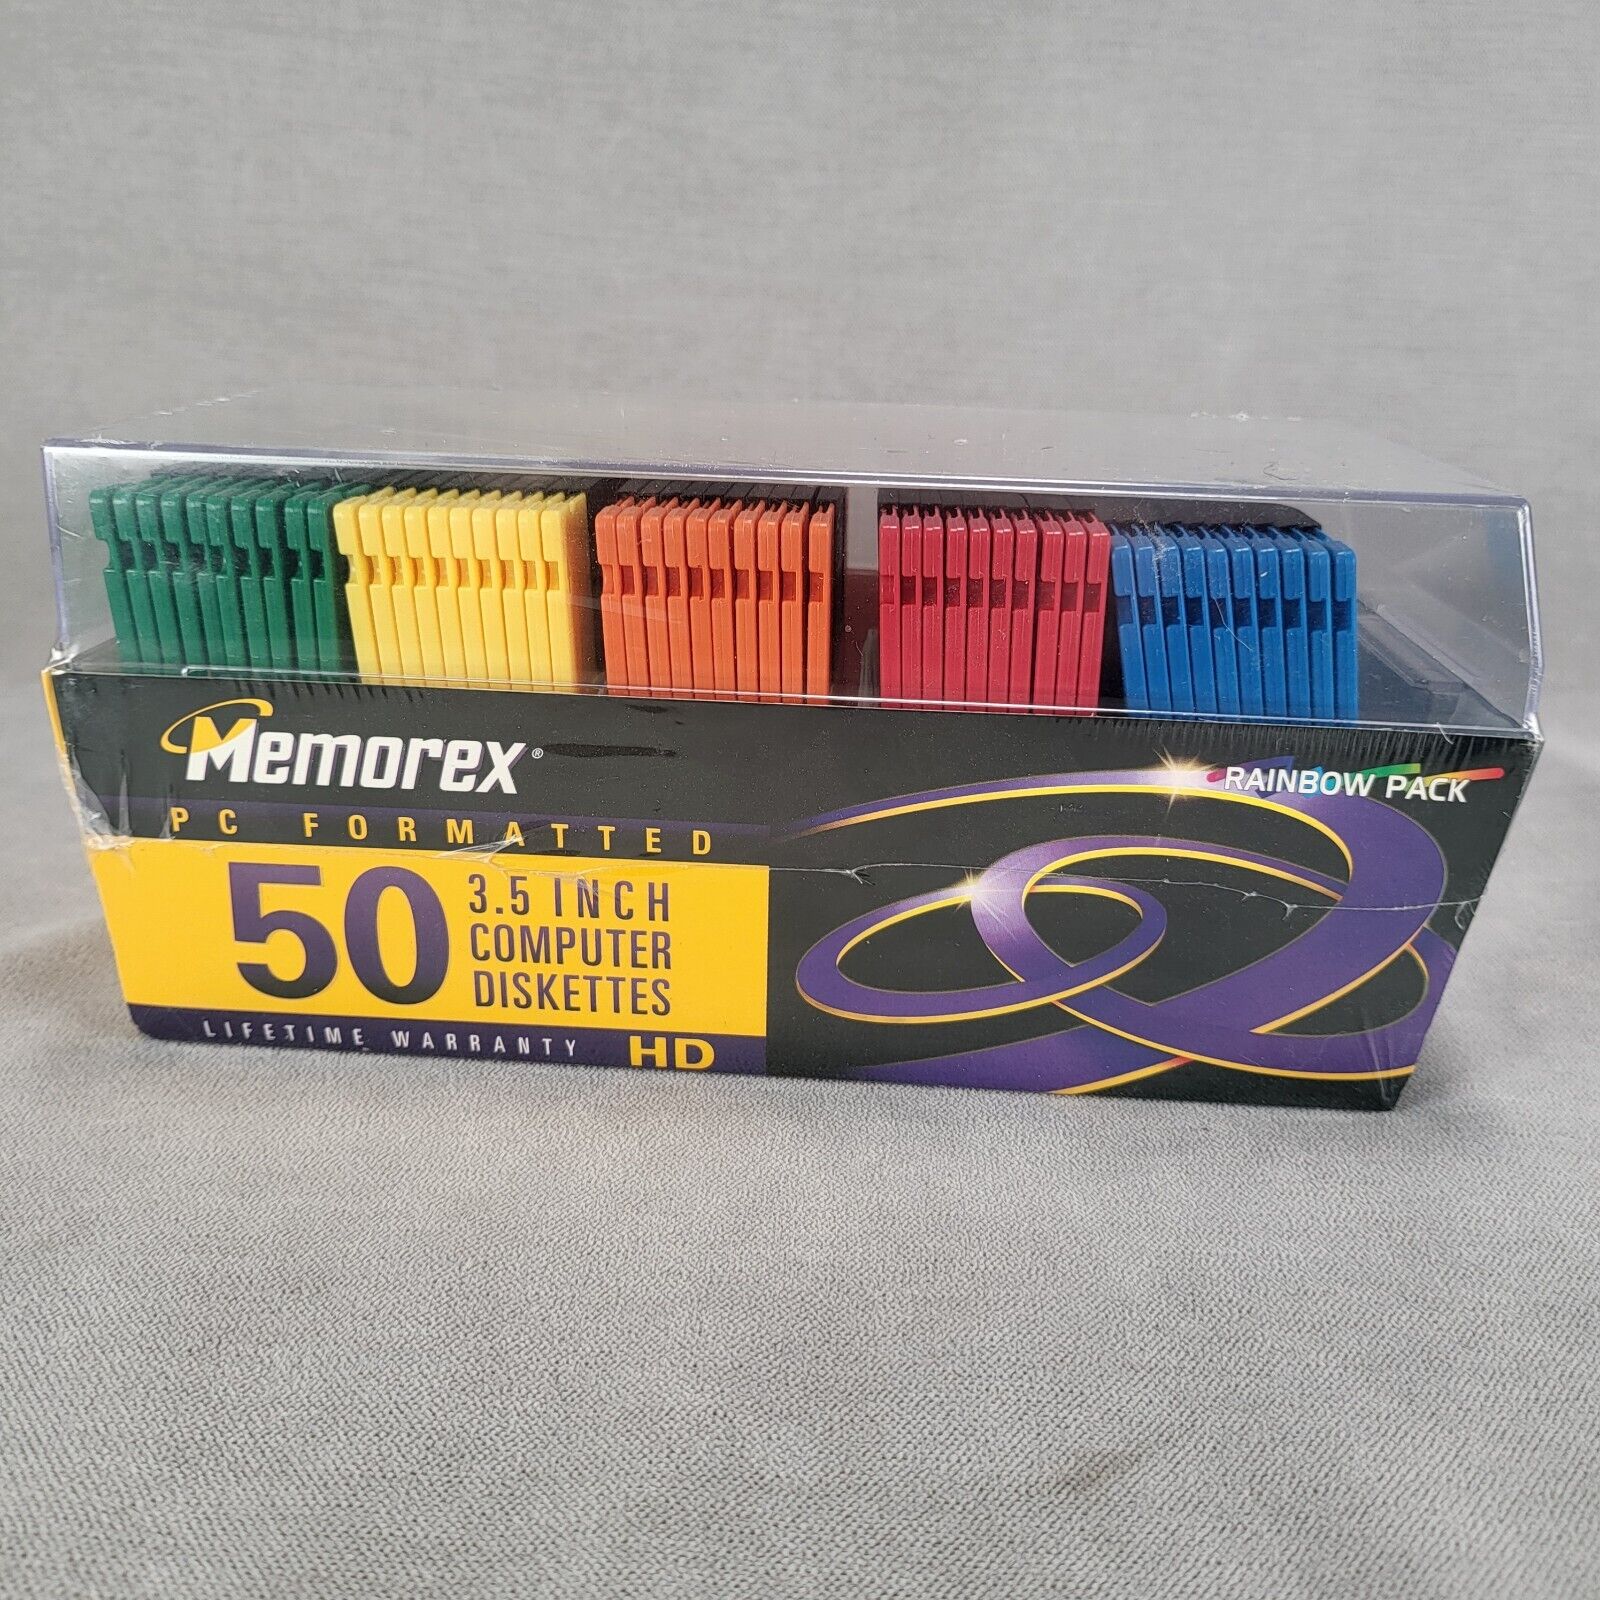 50 Memorex PC Formatted 3.5 Inch Computer Diskettes Plastic Case Floppy Disks HD